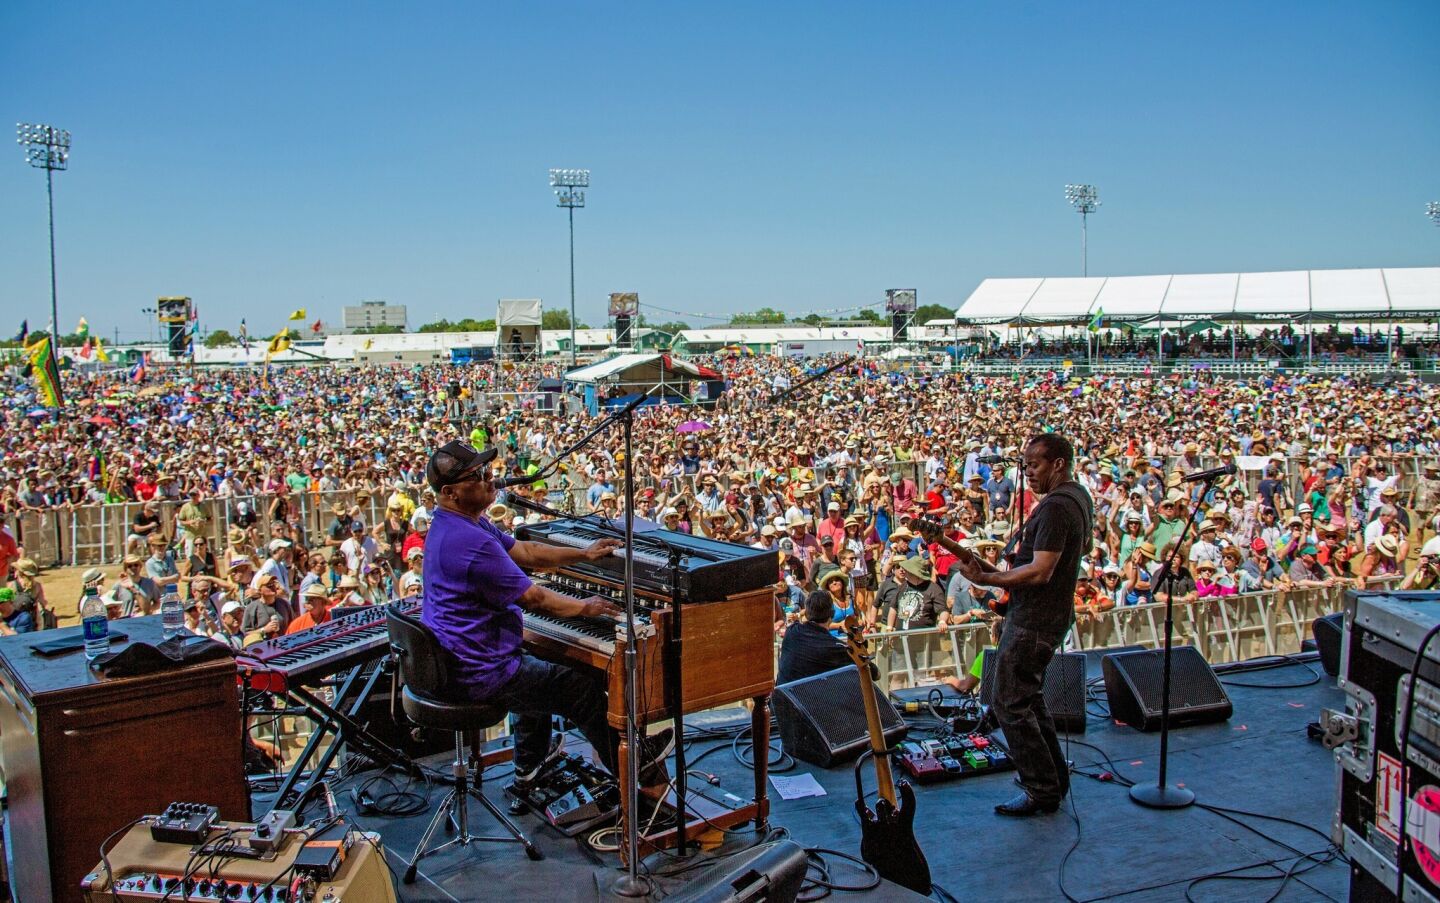 The New Orleans Jazz & Heritage Festival